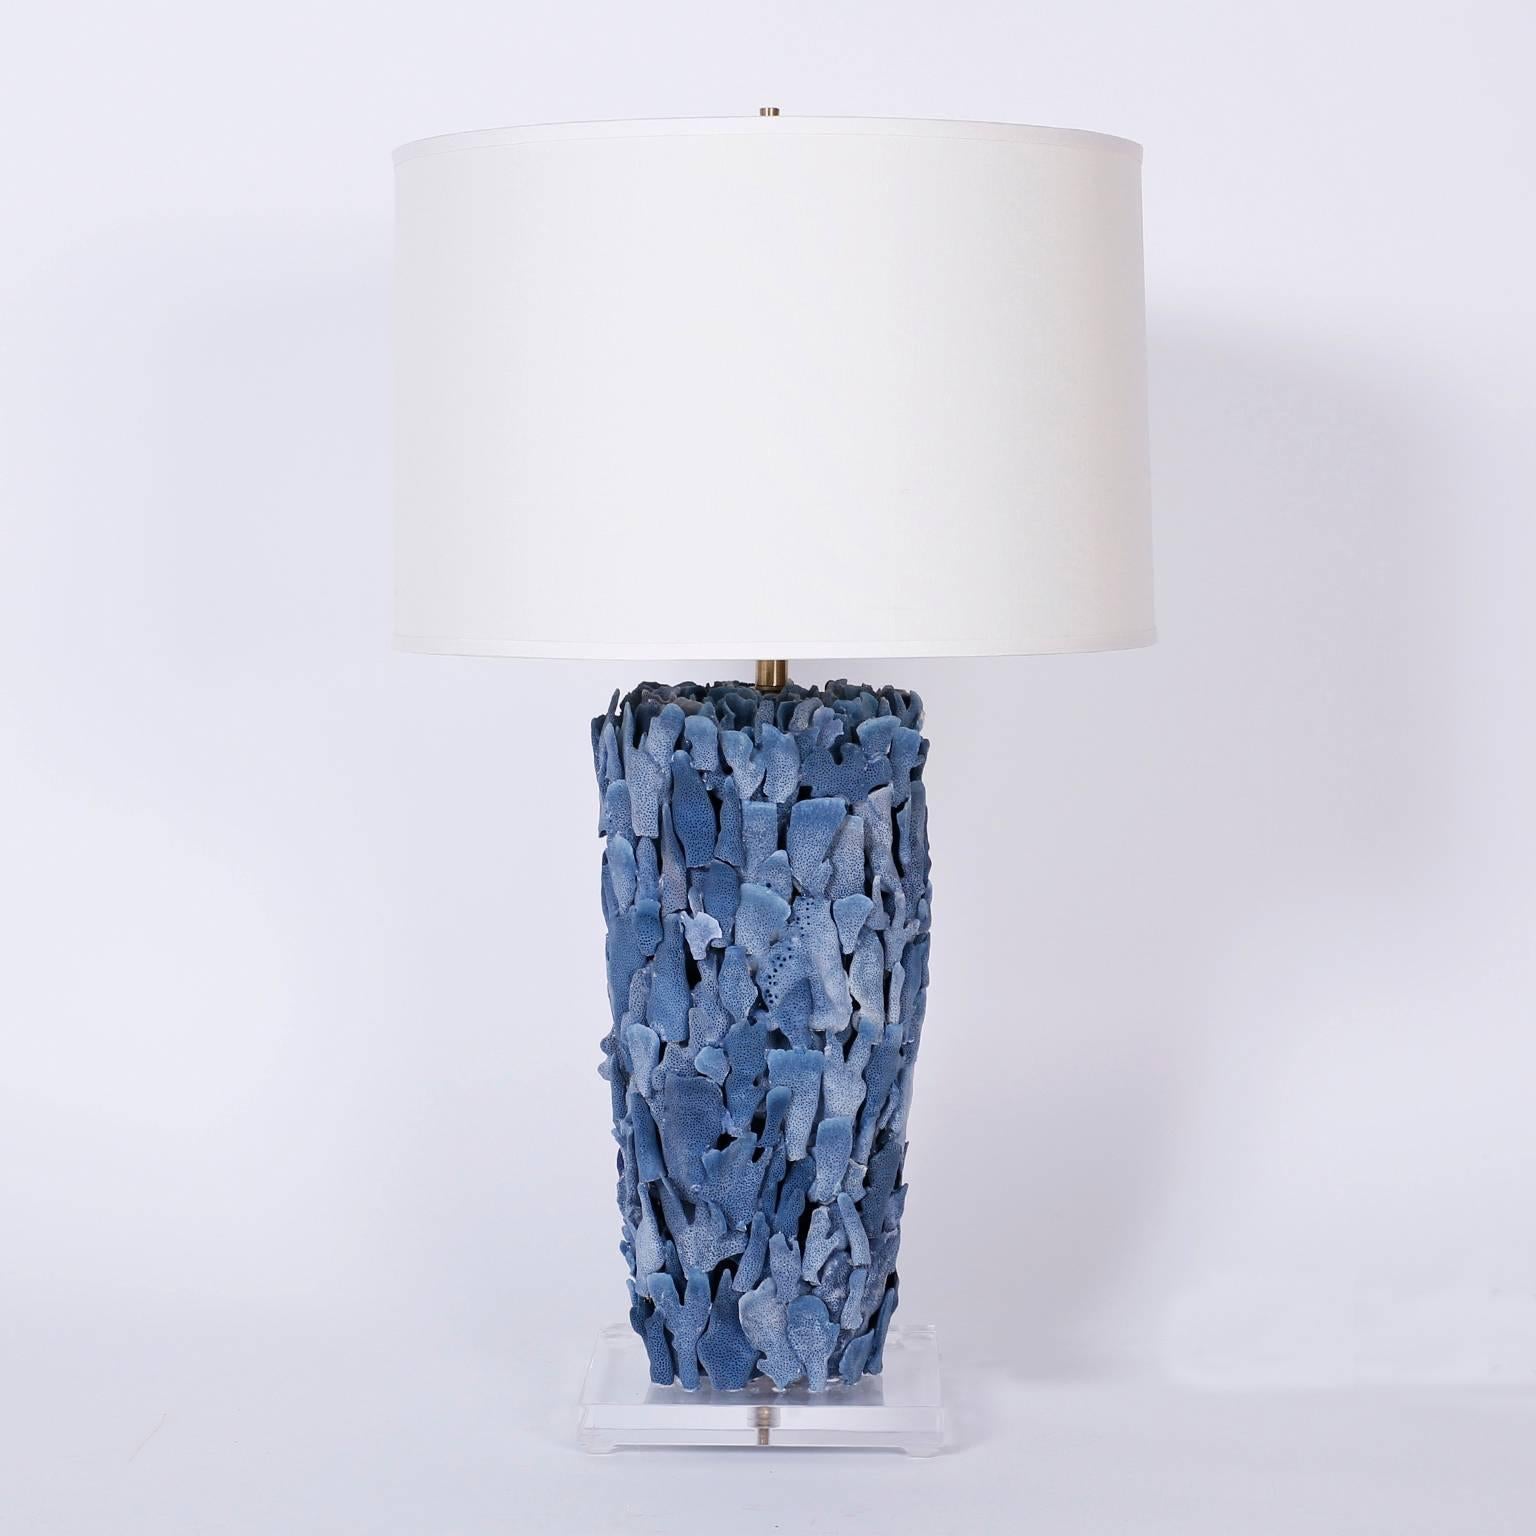 Exclusive pair of blue coral table lamps designed and executed by F.S. Henemader
expertly crafted with a rare alluring indigo colored coral and presented on Lucite bases.